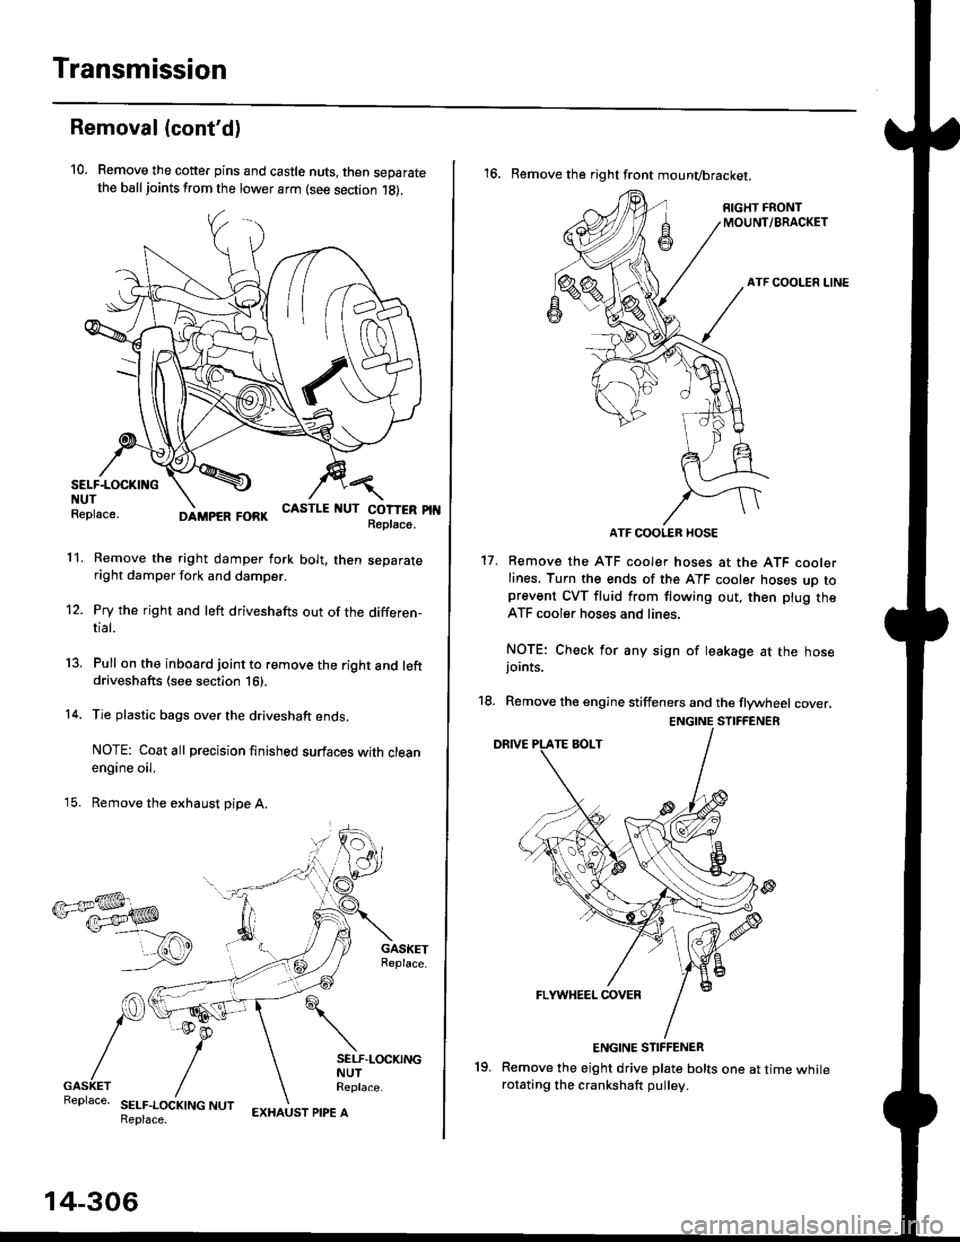 HONDA CIVIC 2000 6.G Workshop Manual Transmission
Removal (contd)
10. Remove the cotte. pins and castle nuts, then separatethe ball joints from the lower arm (see section 1g).
SELF-LOCKING  -=V,
NUT \Replace. oitupea rOax
Remove the rig